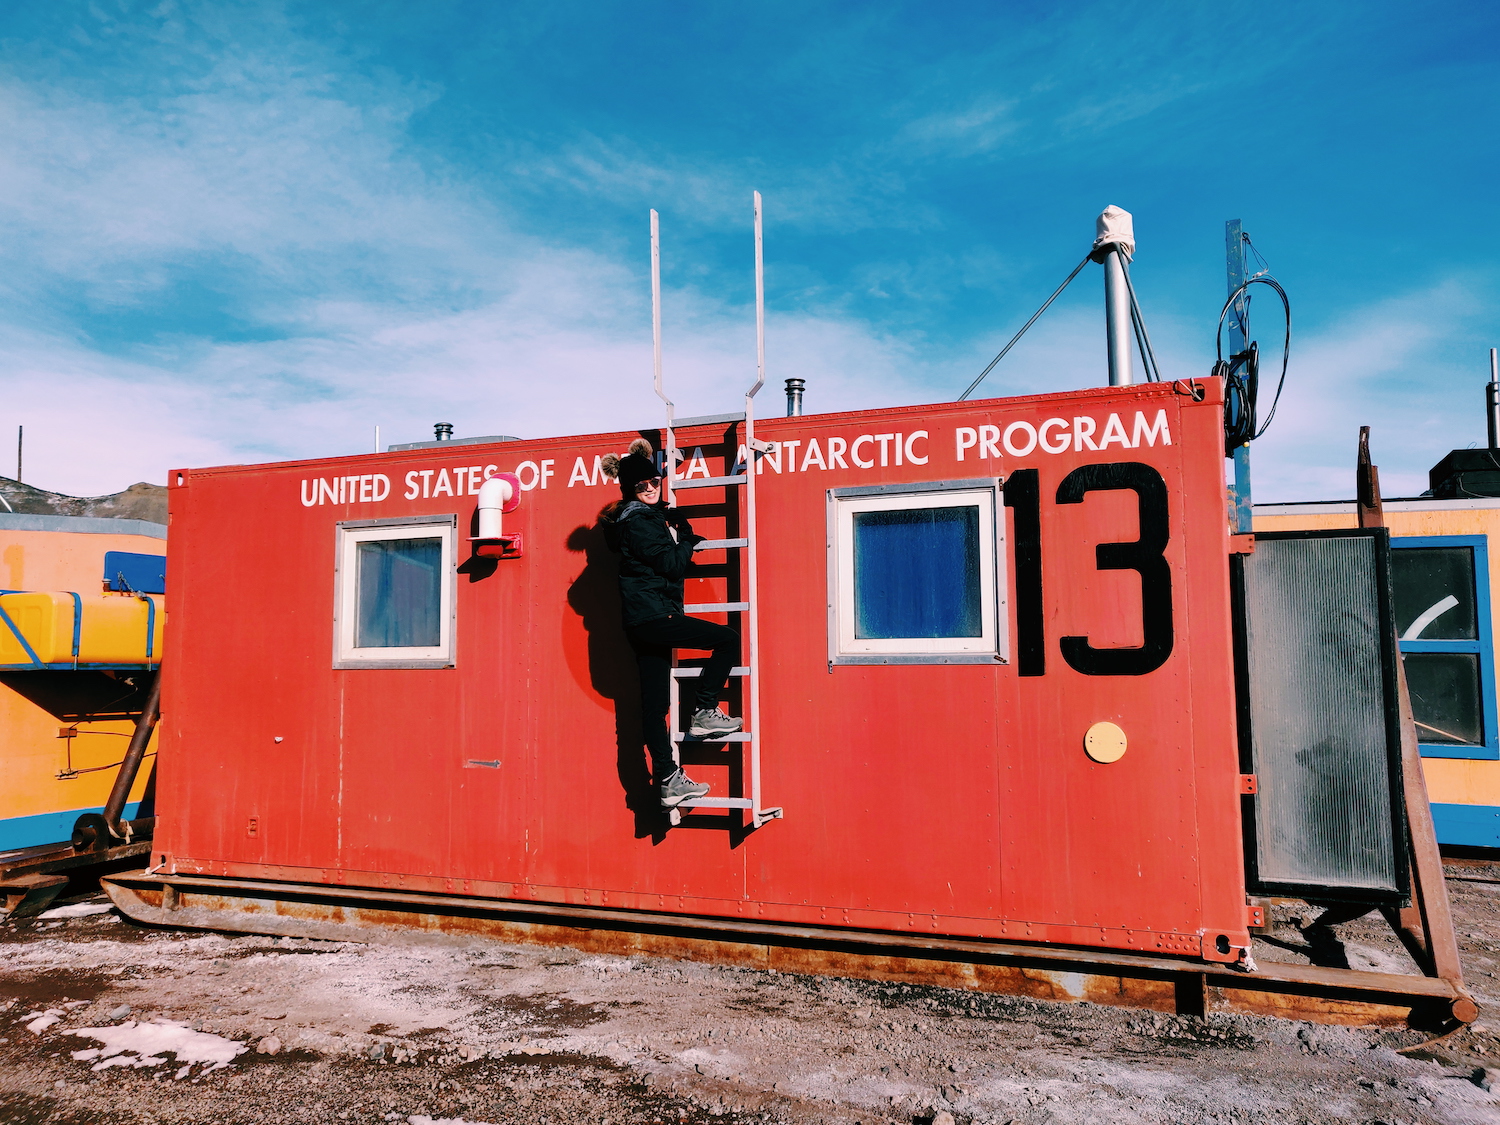 red fishing hut for USAP in Antarctica